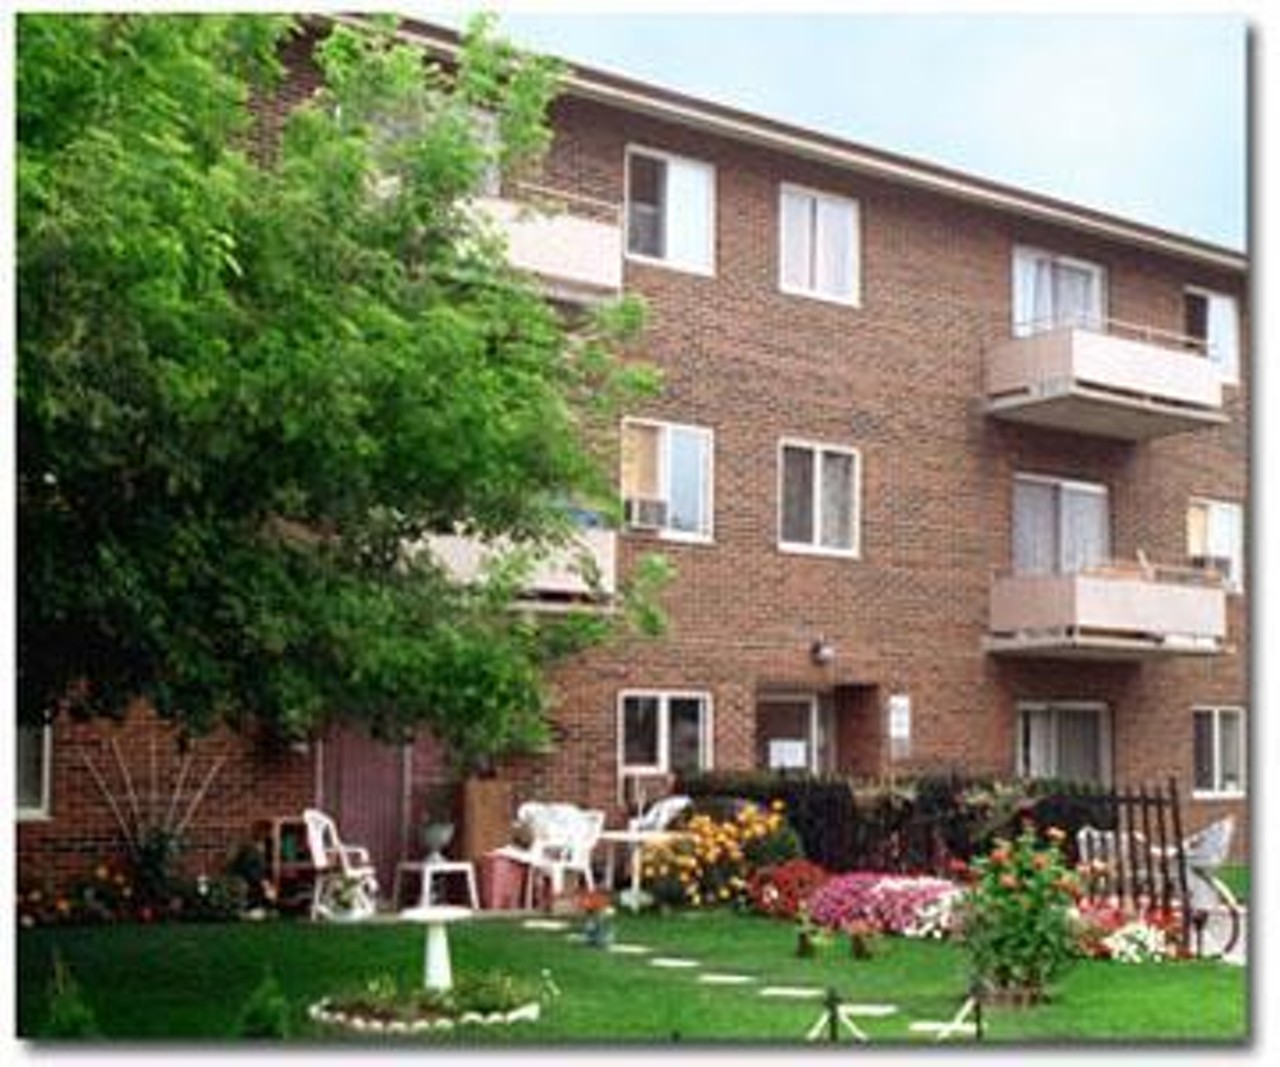 6 apartments for rent in Windsor, Ontario that millennials can actually afford